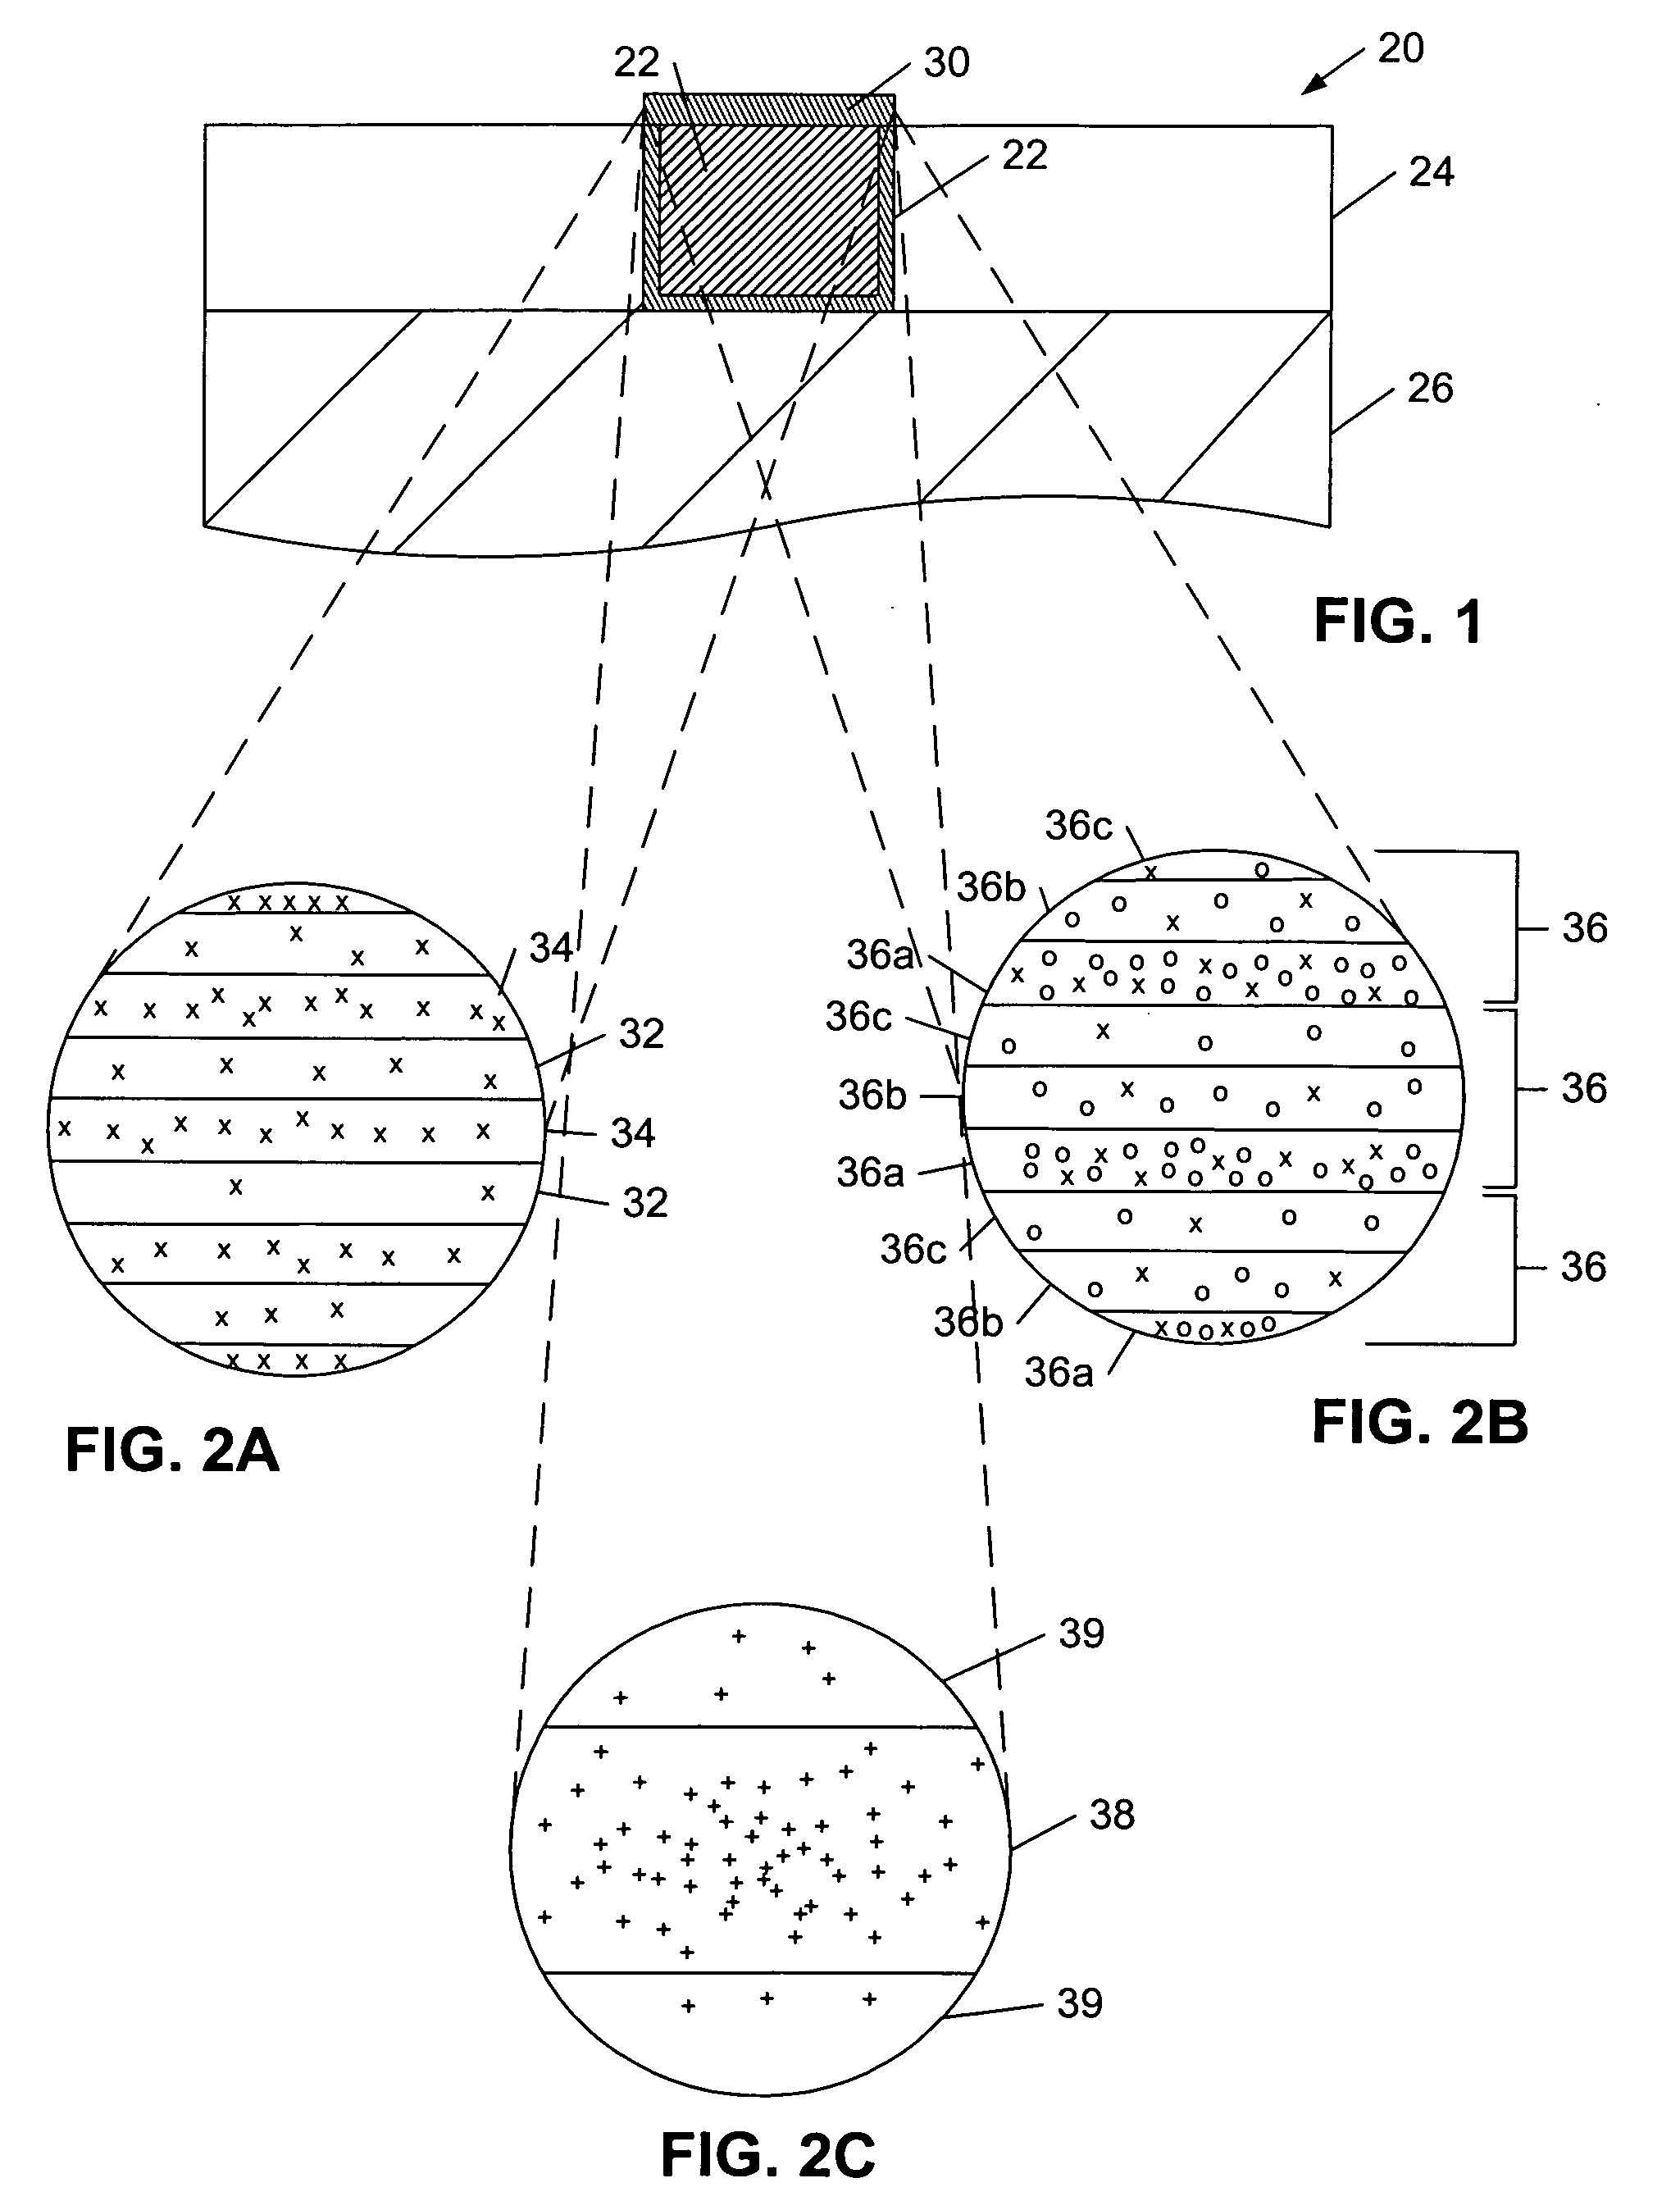 Systems and methods affecting profiles of solutions dispensed across microelectronic topographies during electroless plating processes